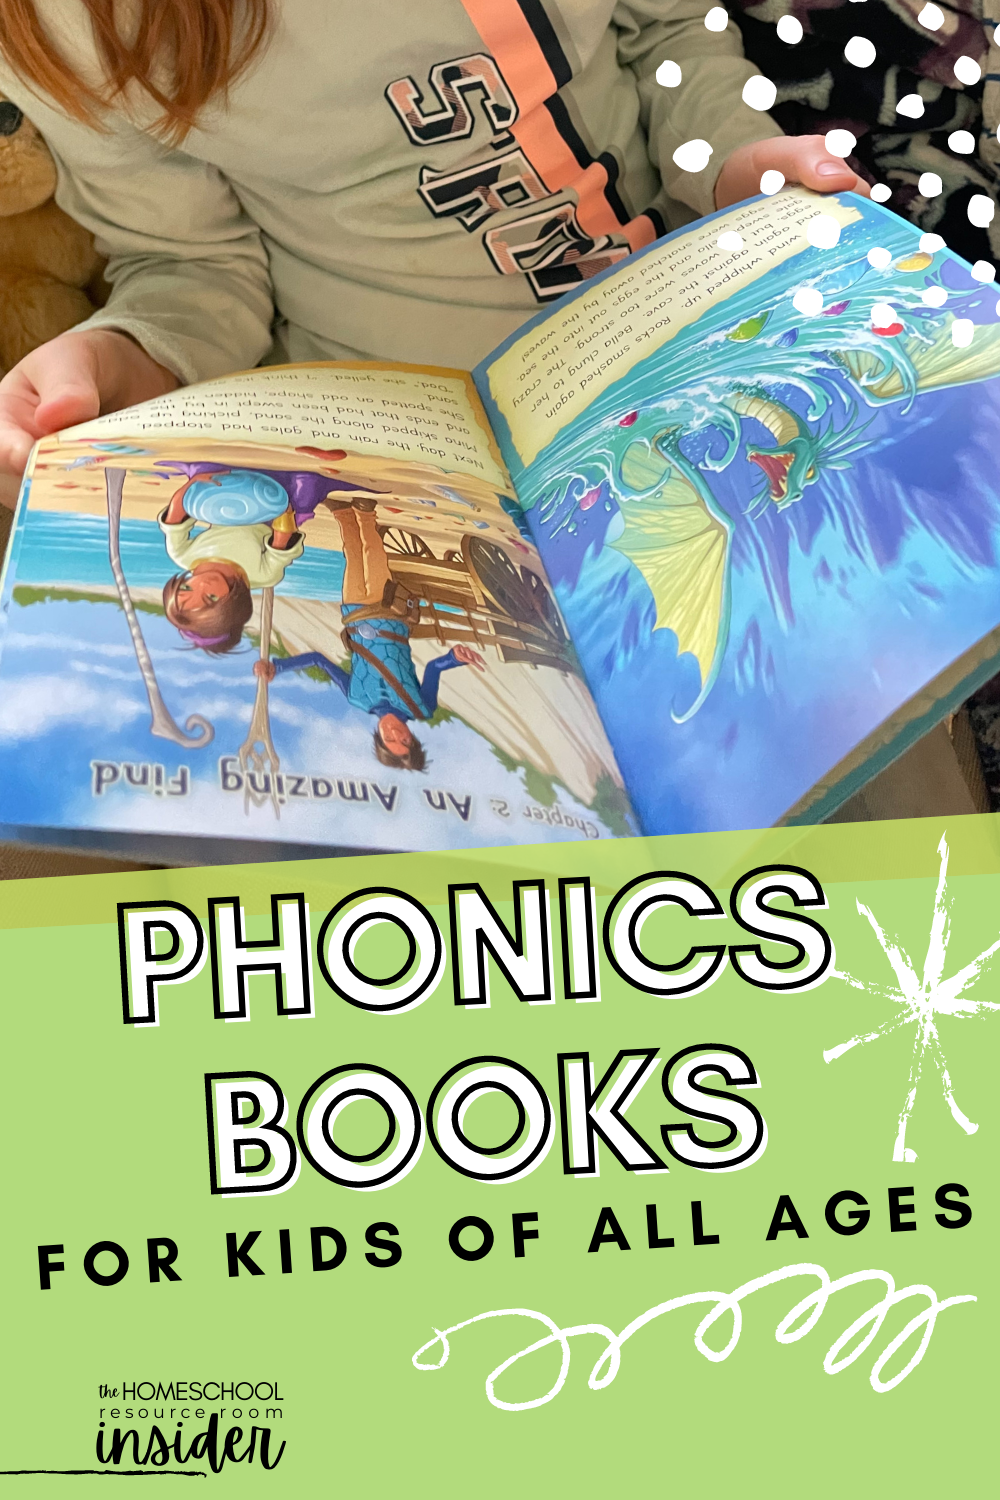 Phonics books for kids ages 5-14! High-interest, engaging decodable readers to reinforce skills & support emerging readers.